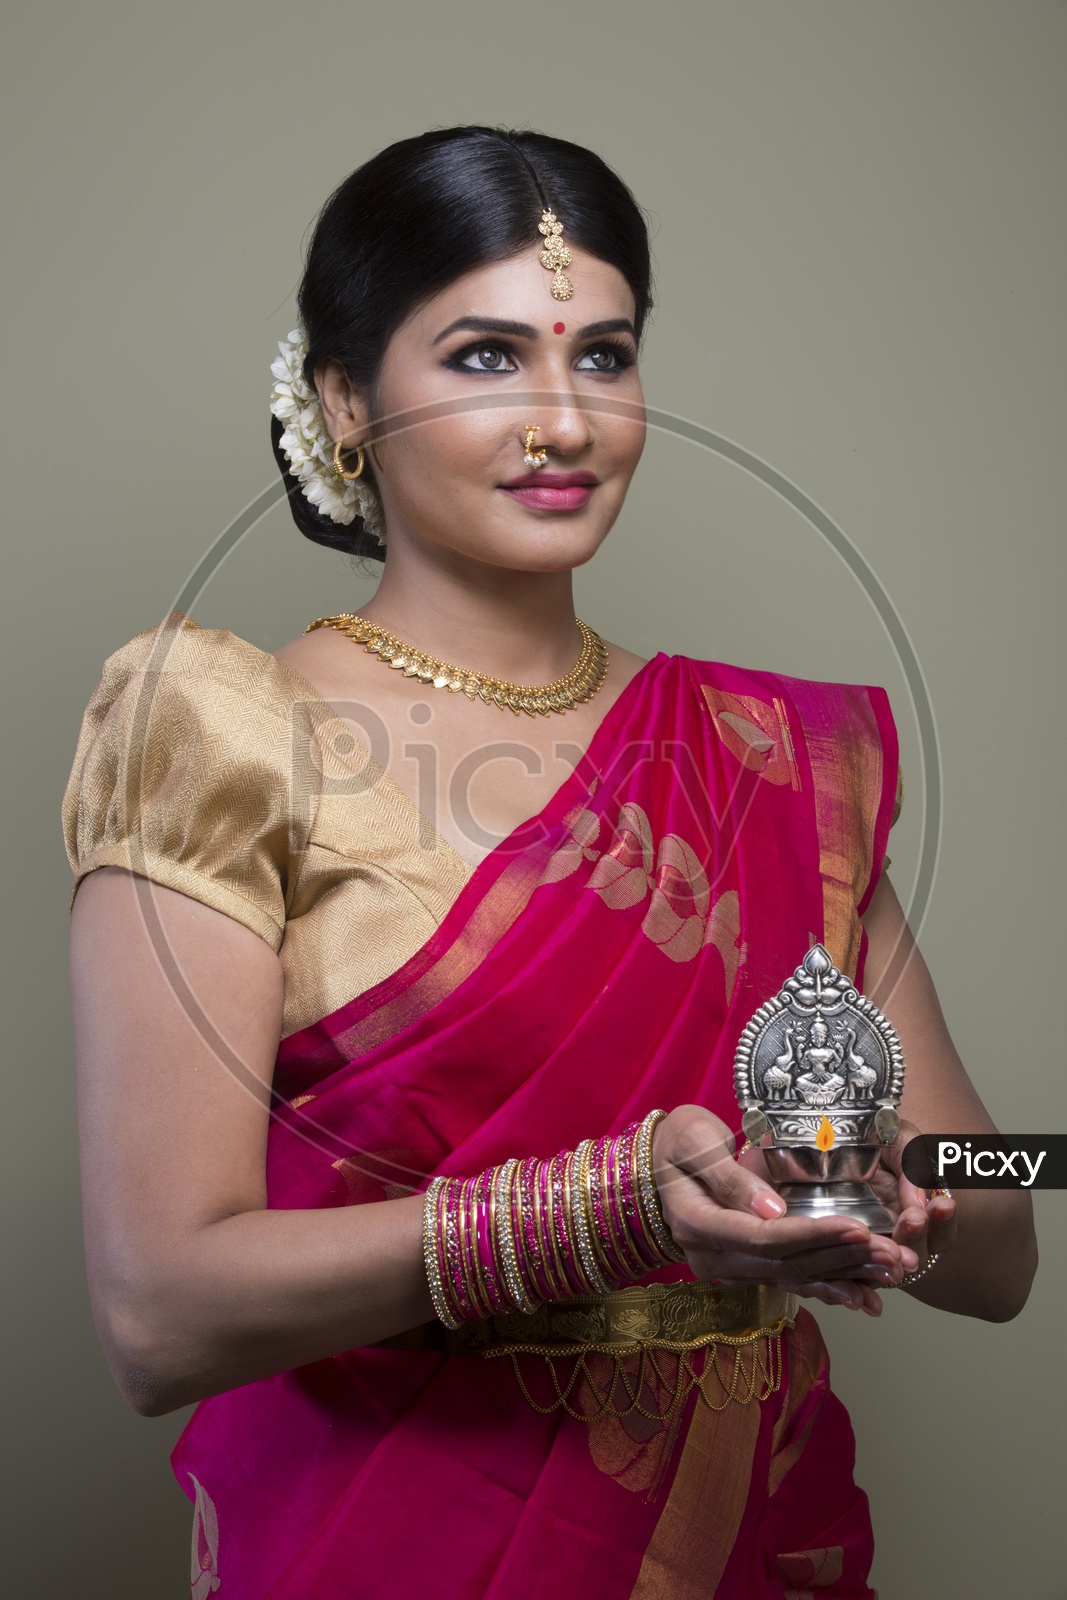 A Beautiful Indian Female Model  in Traditional Attire Wearing a Saree and Jewelry with an Expression and With a Traditional Silver Oil Lamp In Hands  on an Isolated Gery Background